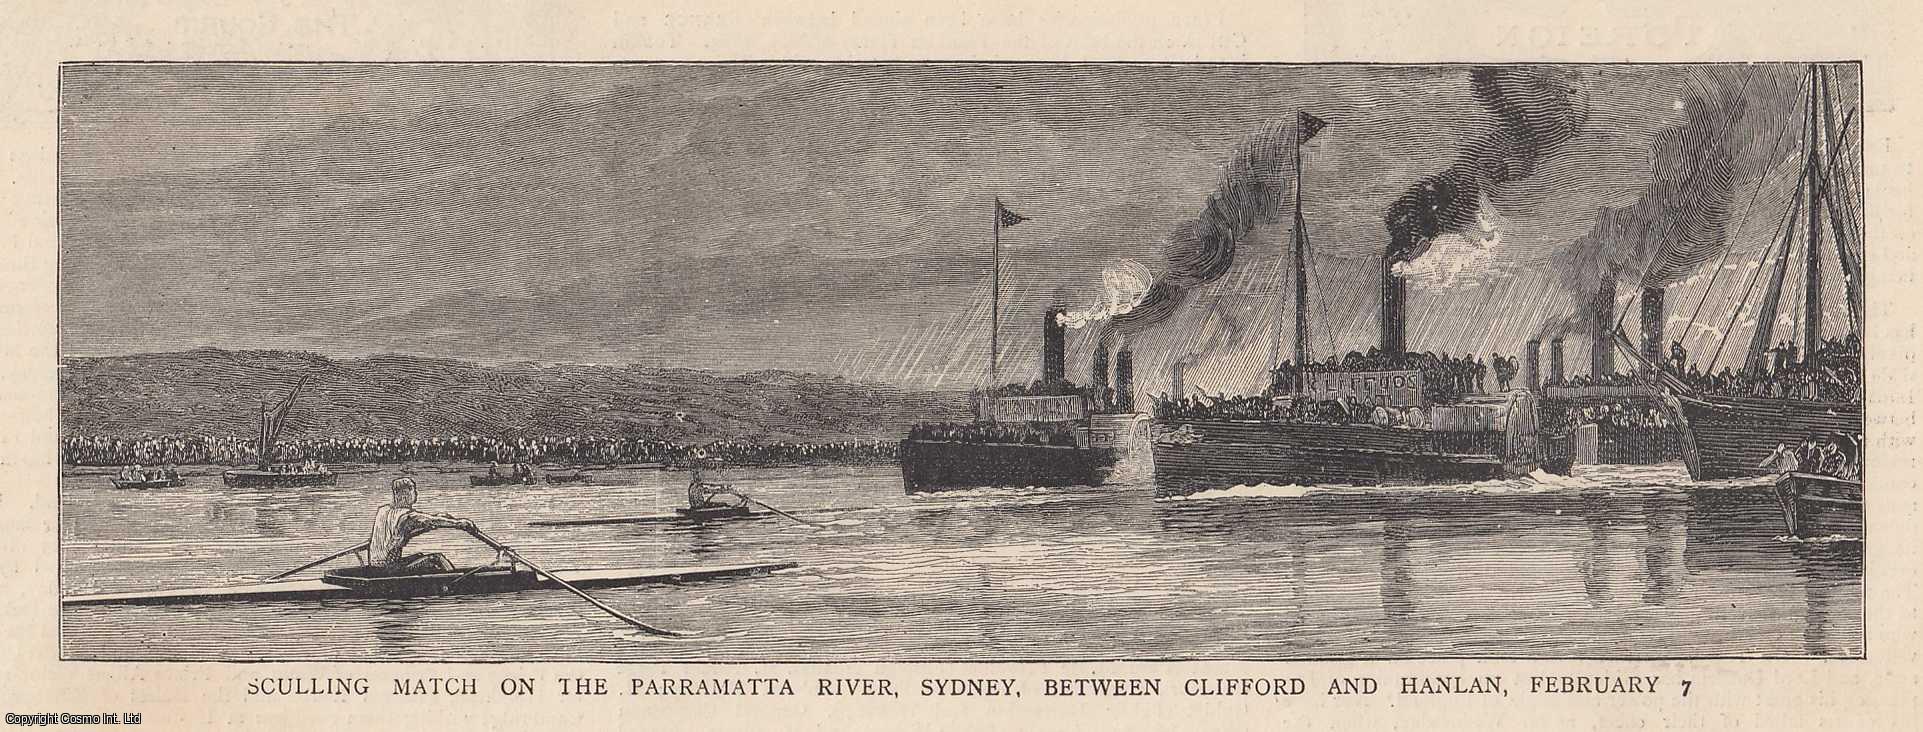 Australian Rowing - Sculling Match on the Parramatta River, Sydney, between Clifford and Hanlan, February 7, 1885. An original print from the Graphic Illustrated Weekly Magazine, 1885.